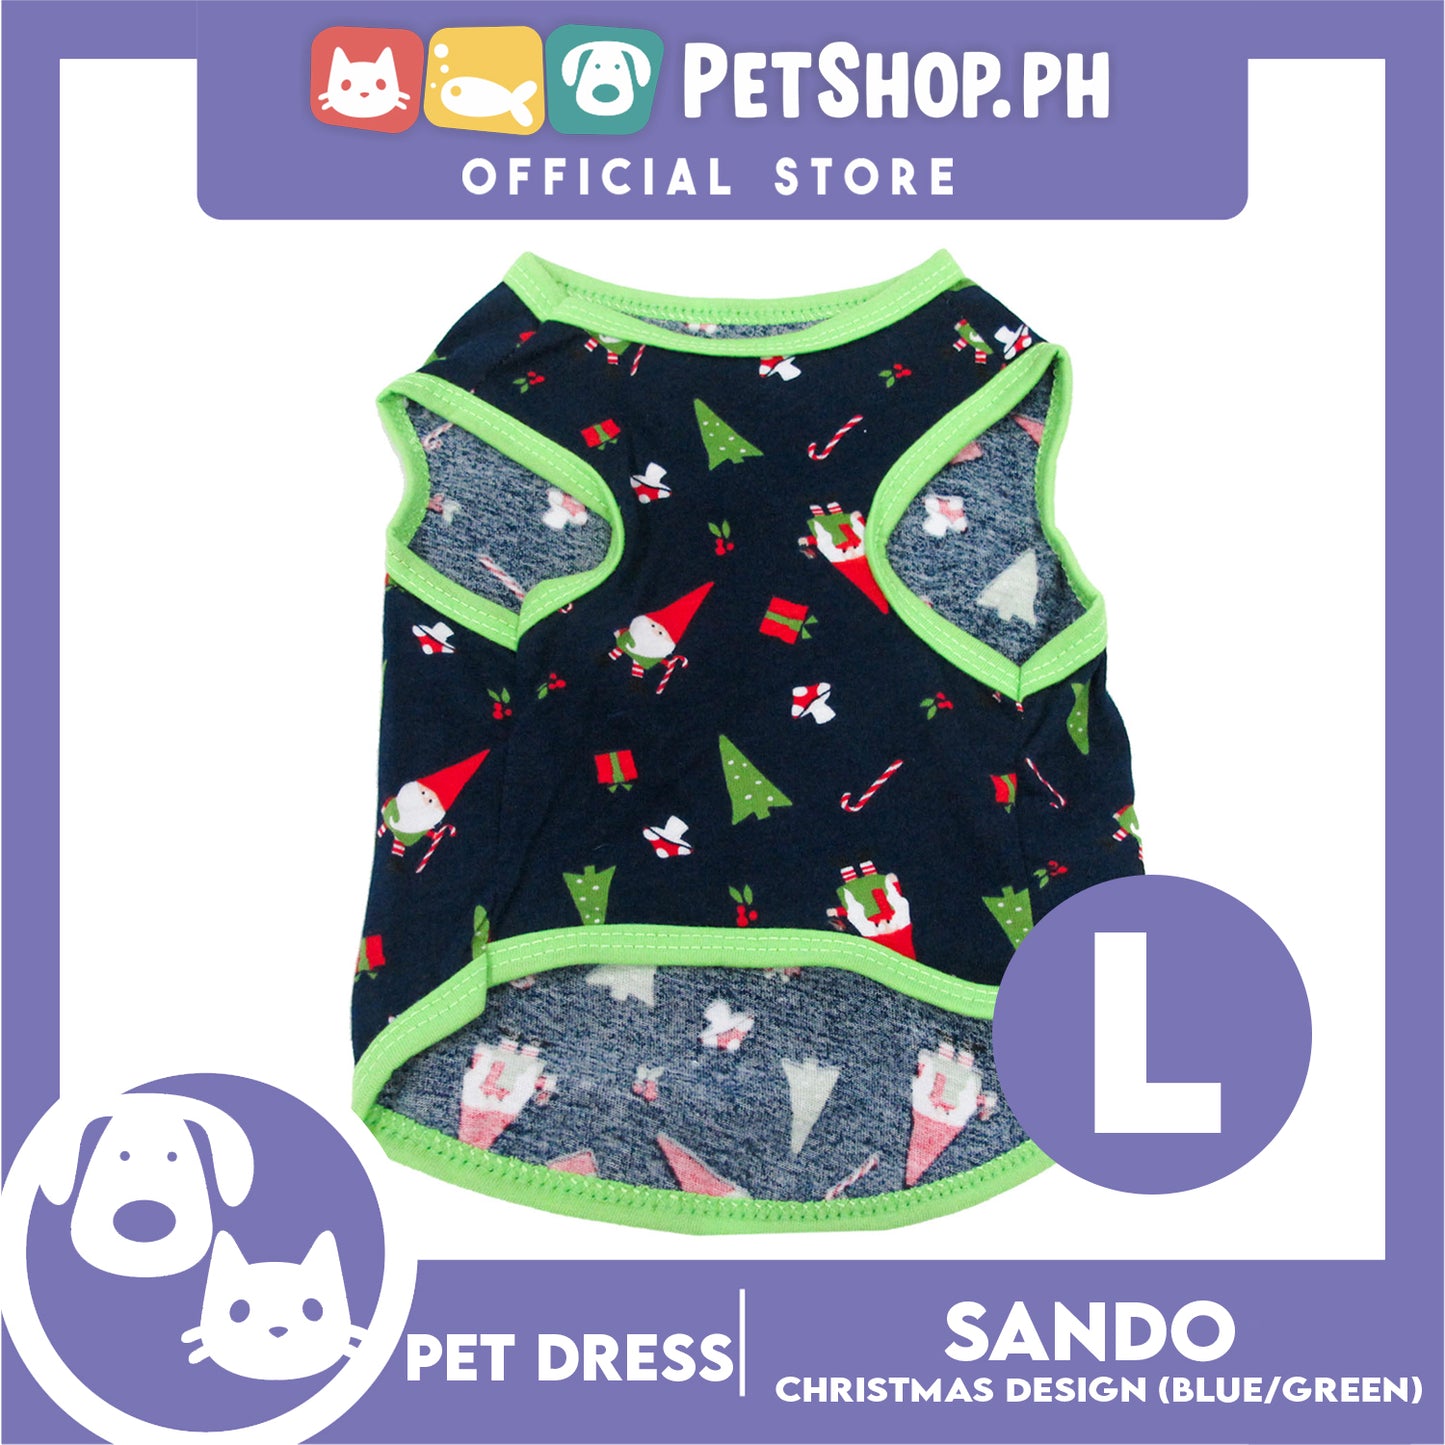 Pet Shirt Christmas Design with Green Piping Sleeveless (Large) for Puppy, Small Dog & Cats- Sando Breathable Clothes, Pet T-shirt, Sweatshirt